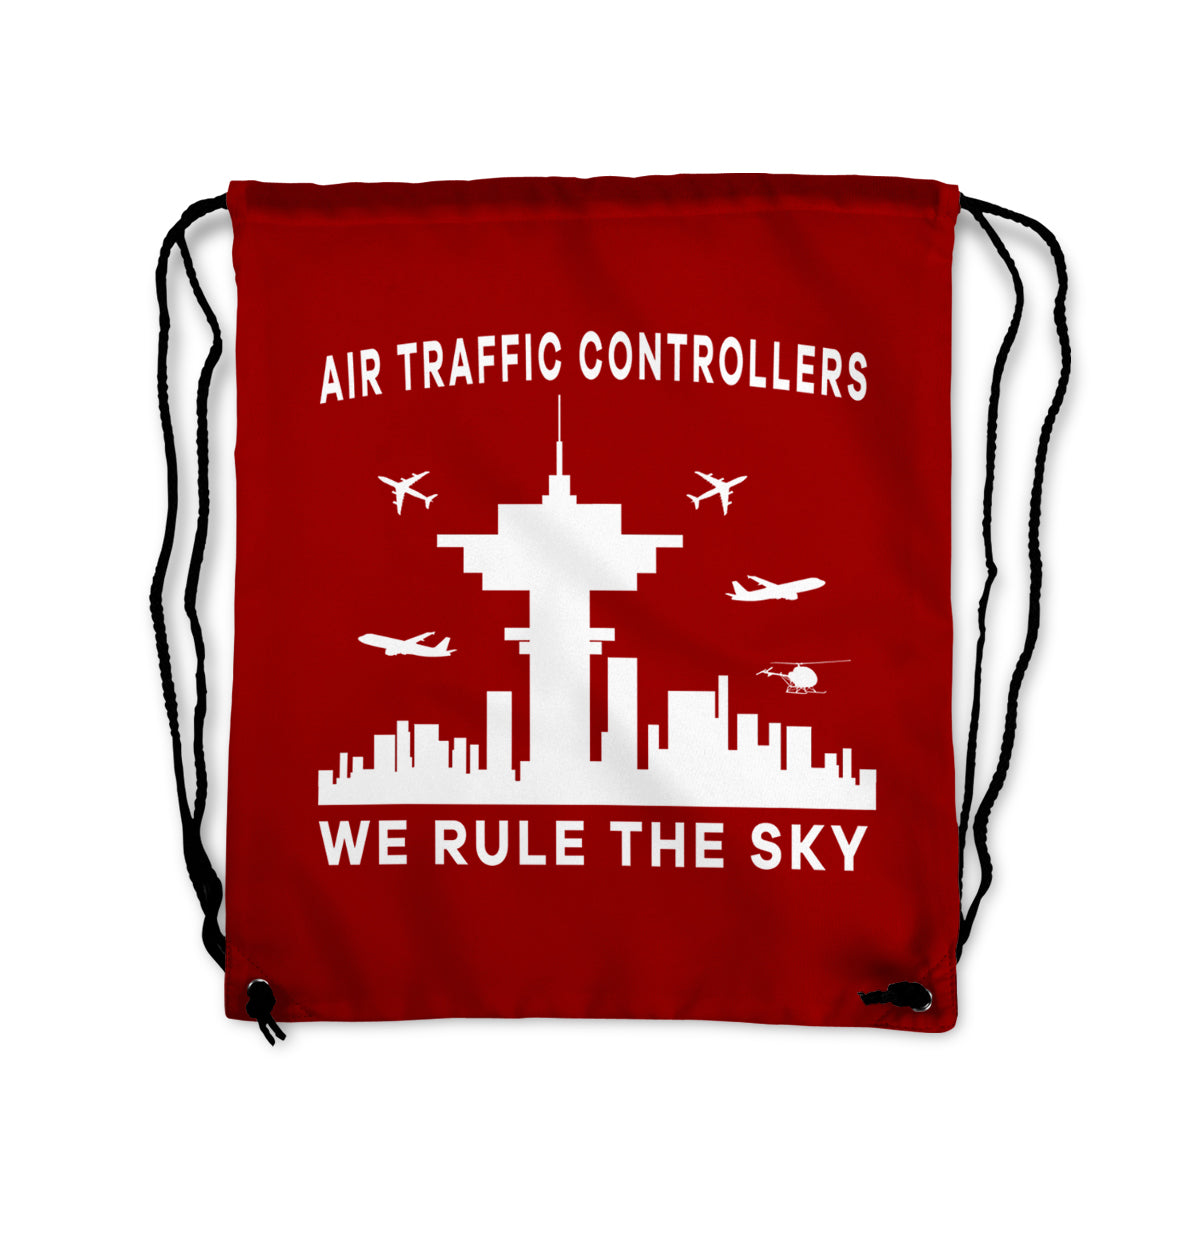 Air Traffic Controllers - We Rule The Sky Designed Drawstring Bags